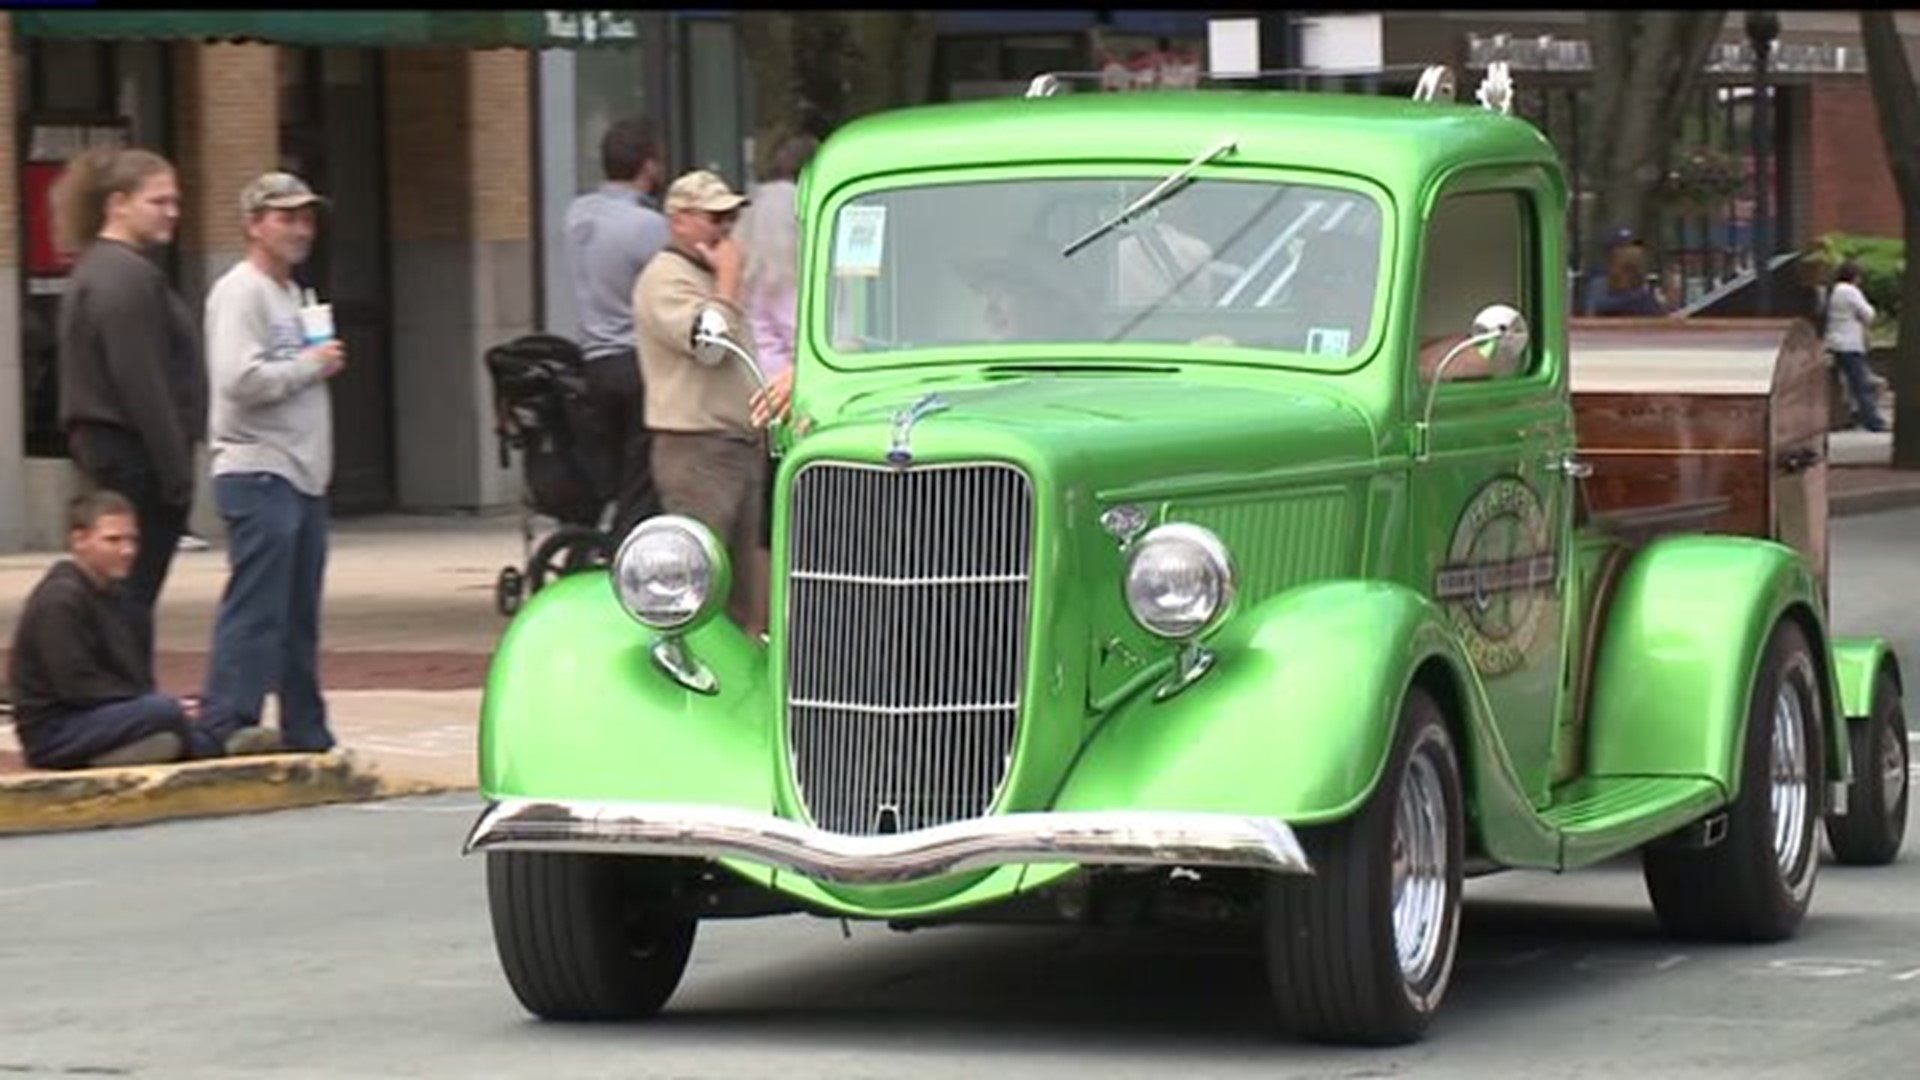 Classic cars and trucks take over streets of York for Street Rod